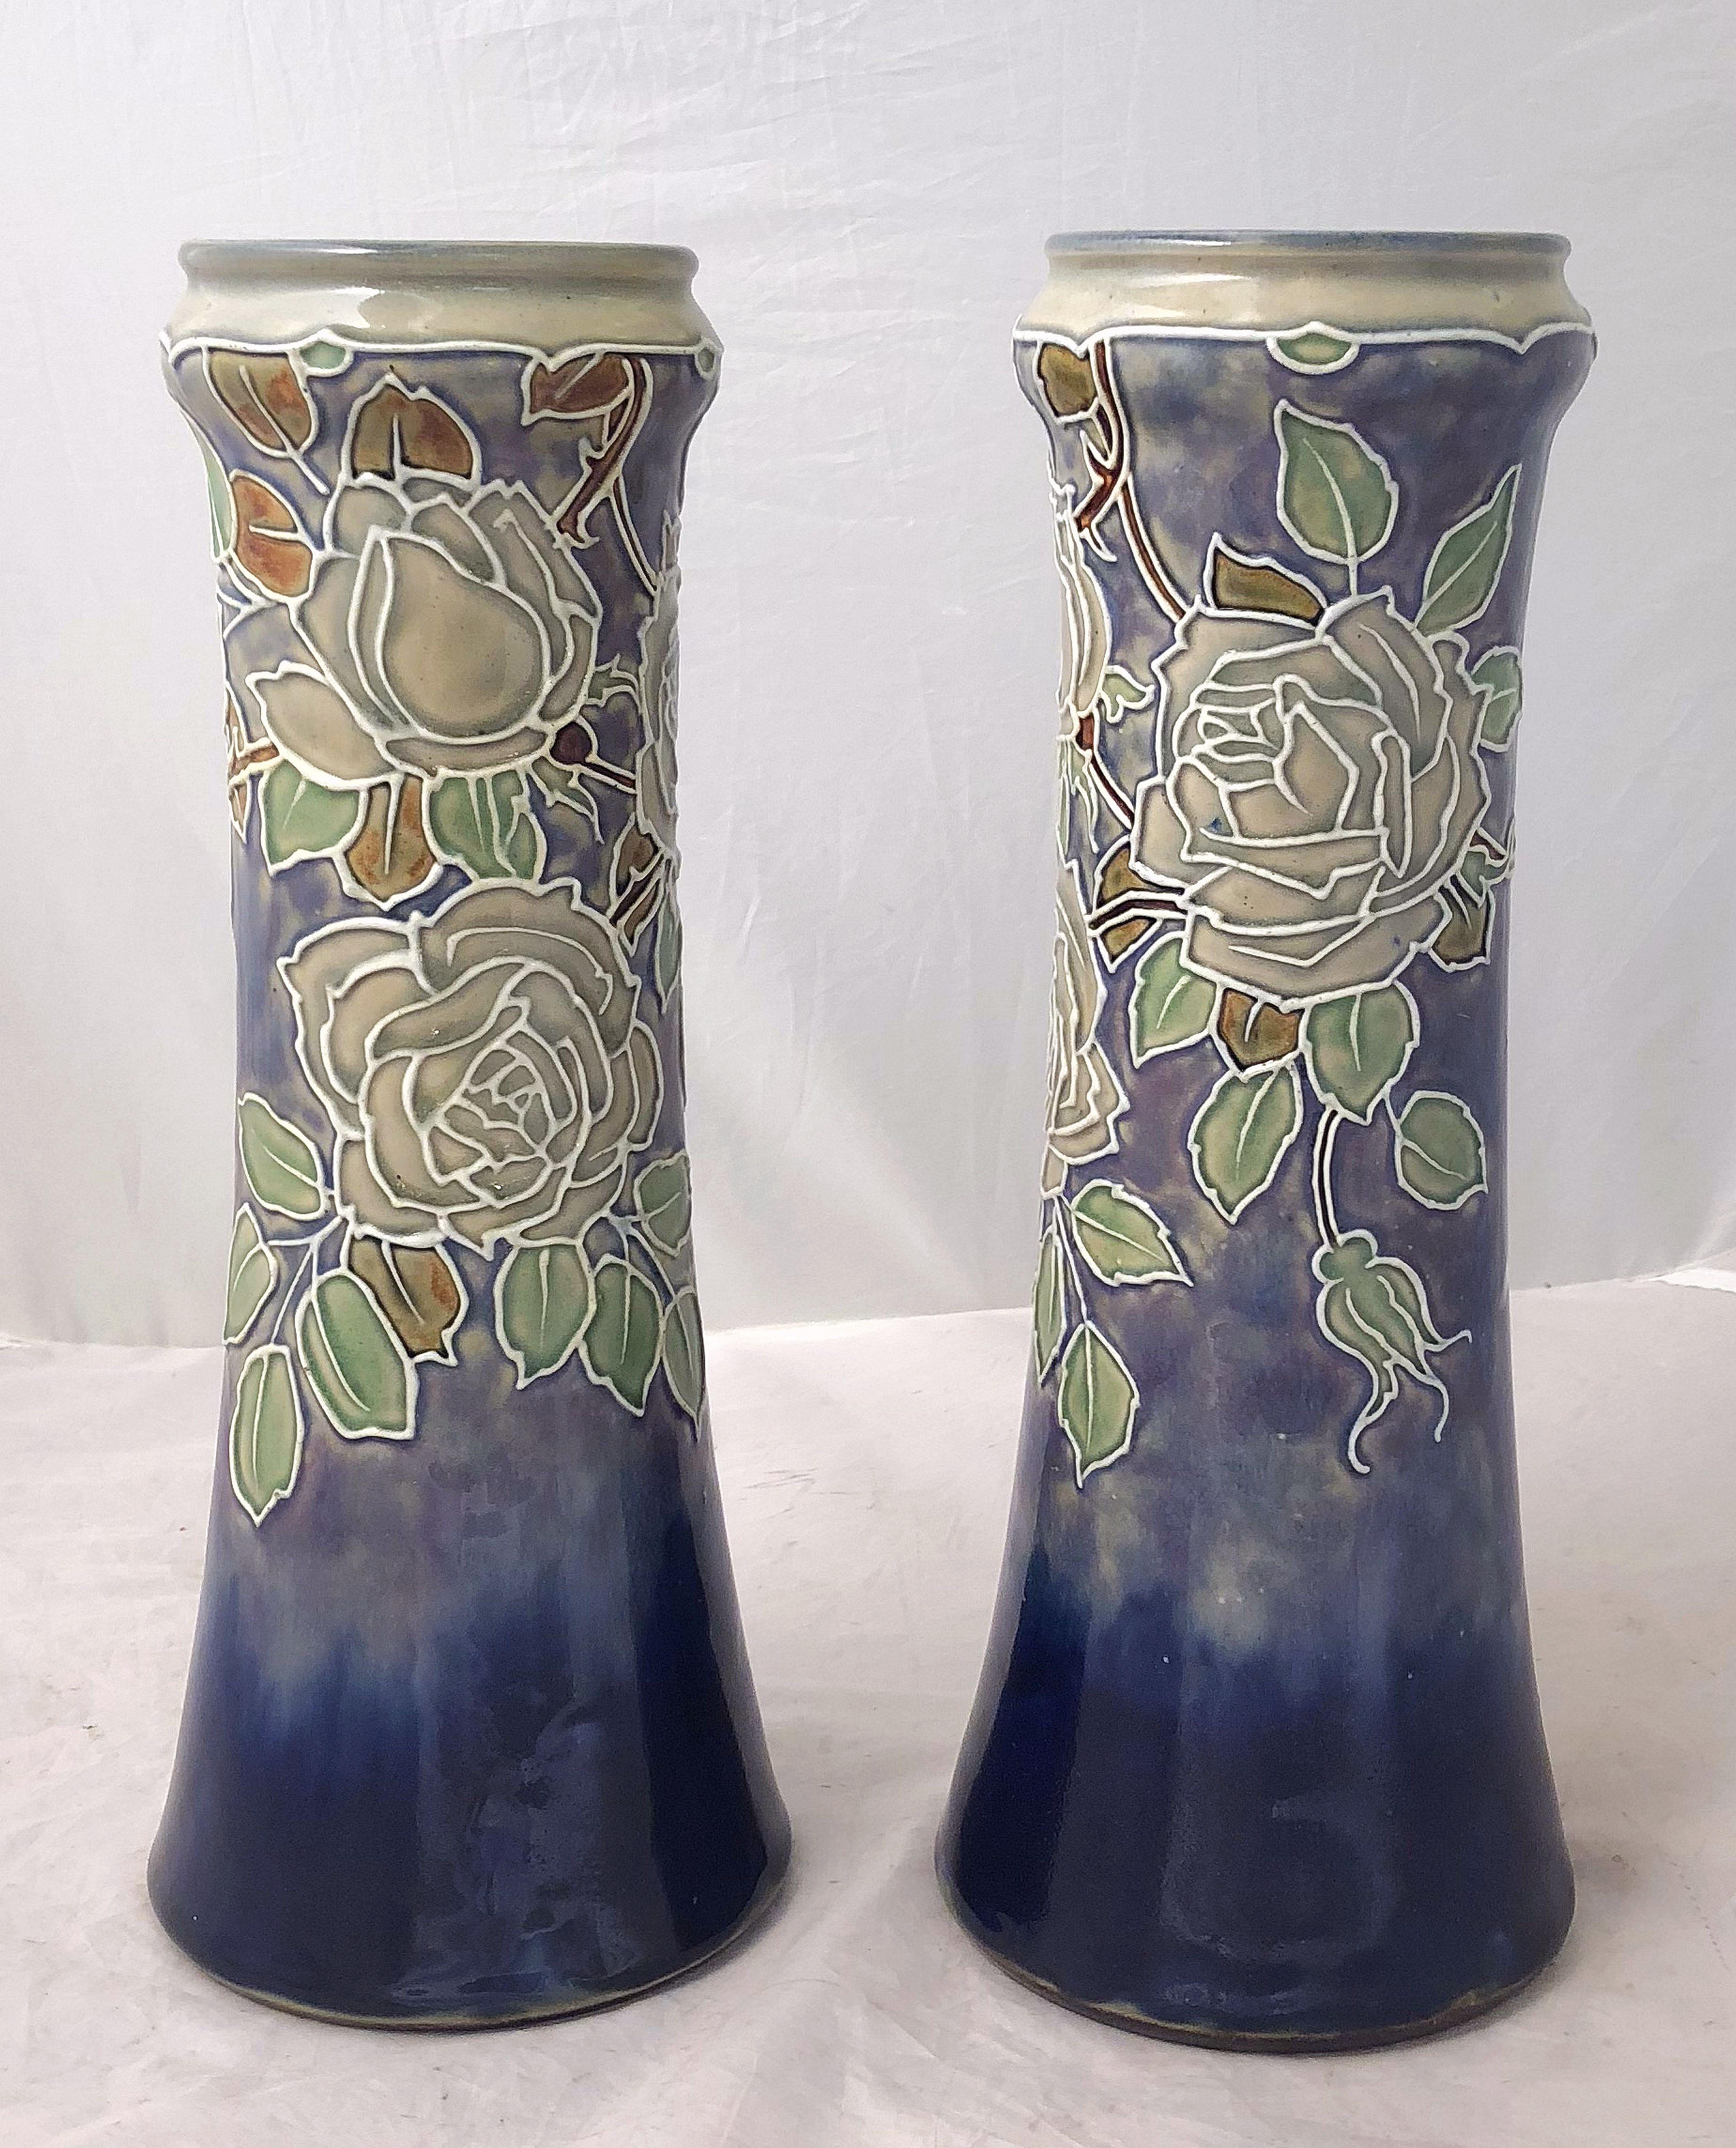 A fine pair of English decorative ceramic vases from the Arts & Crafts period, by the celebrated pottery firm, Royal Doulton - each vase featuring a lovely foliate design around the circumference. 

With impressed mark to base.

Priced as a pair